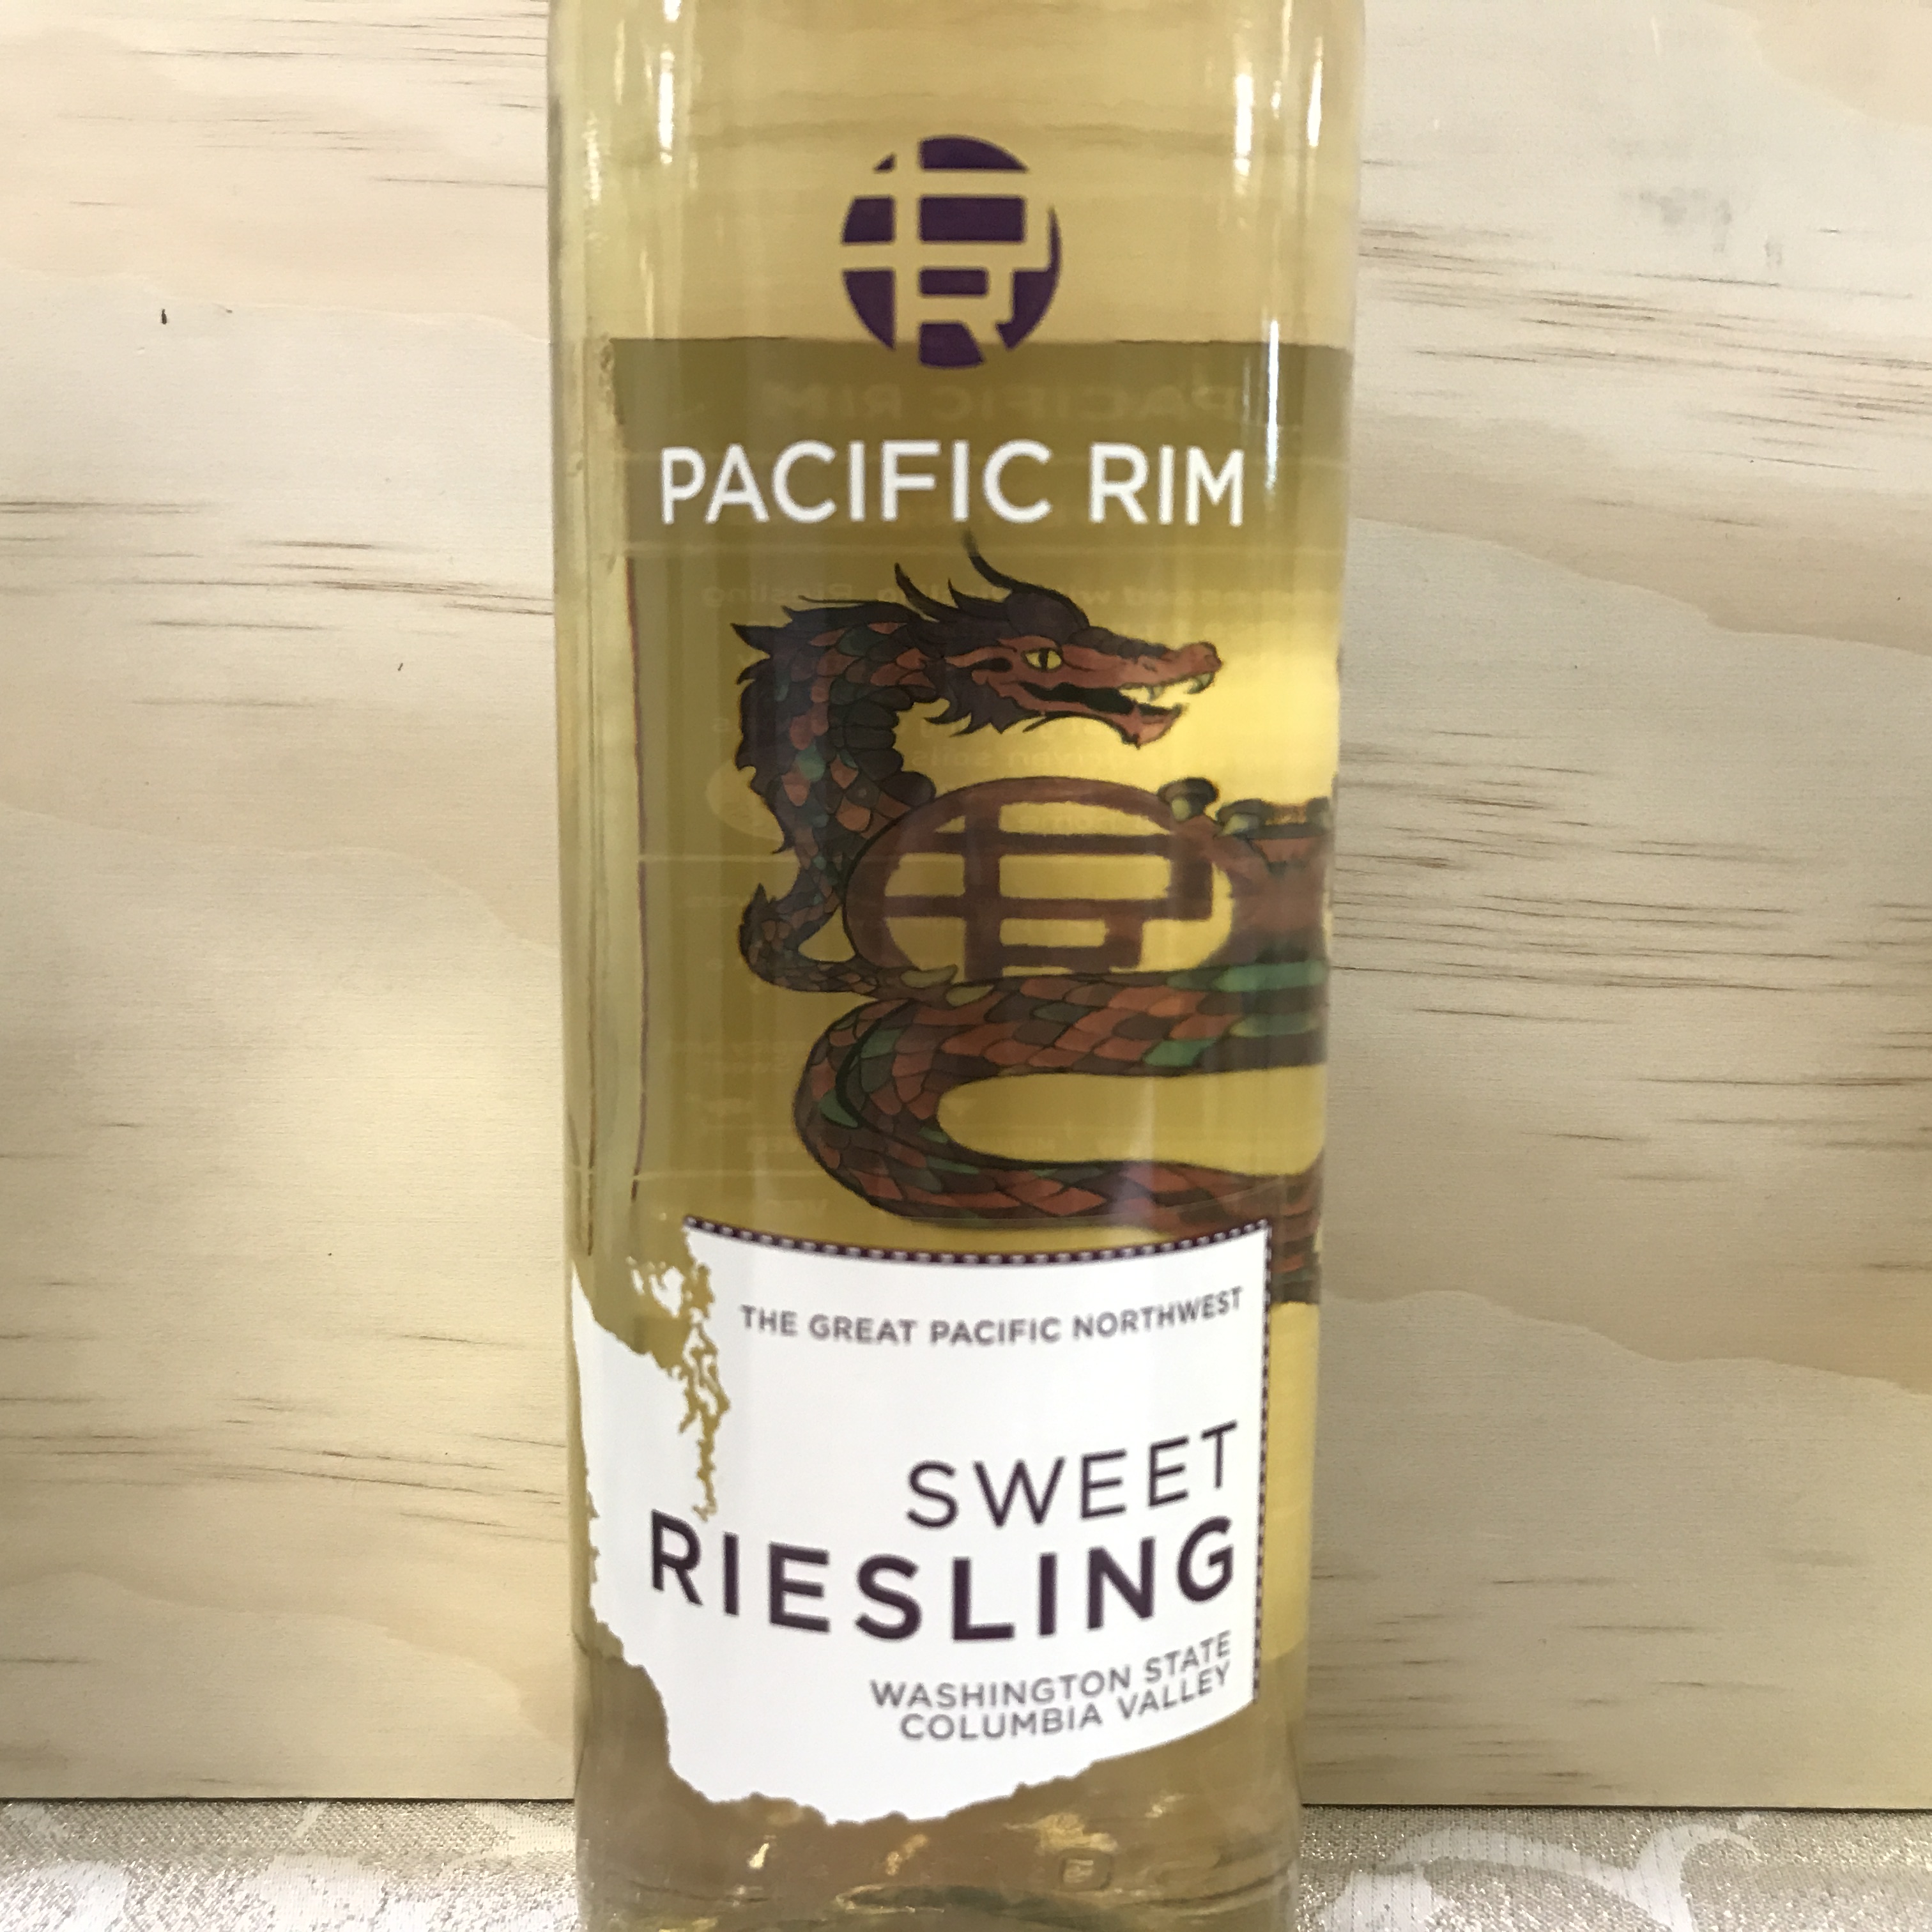 Pacific Rim Sweet Riesling Columbia Valley 2020